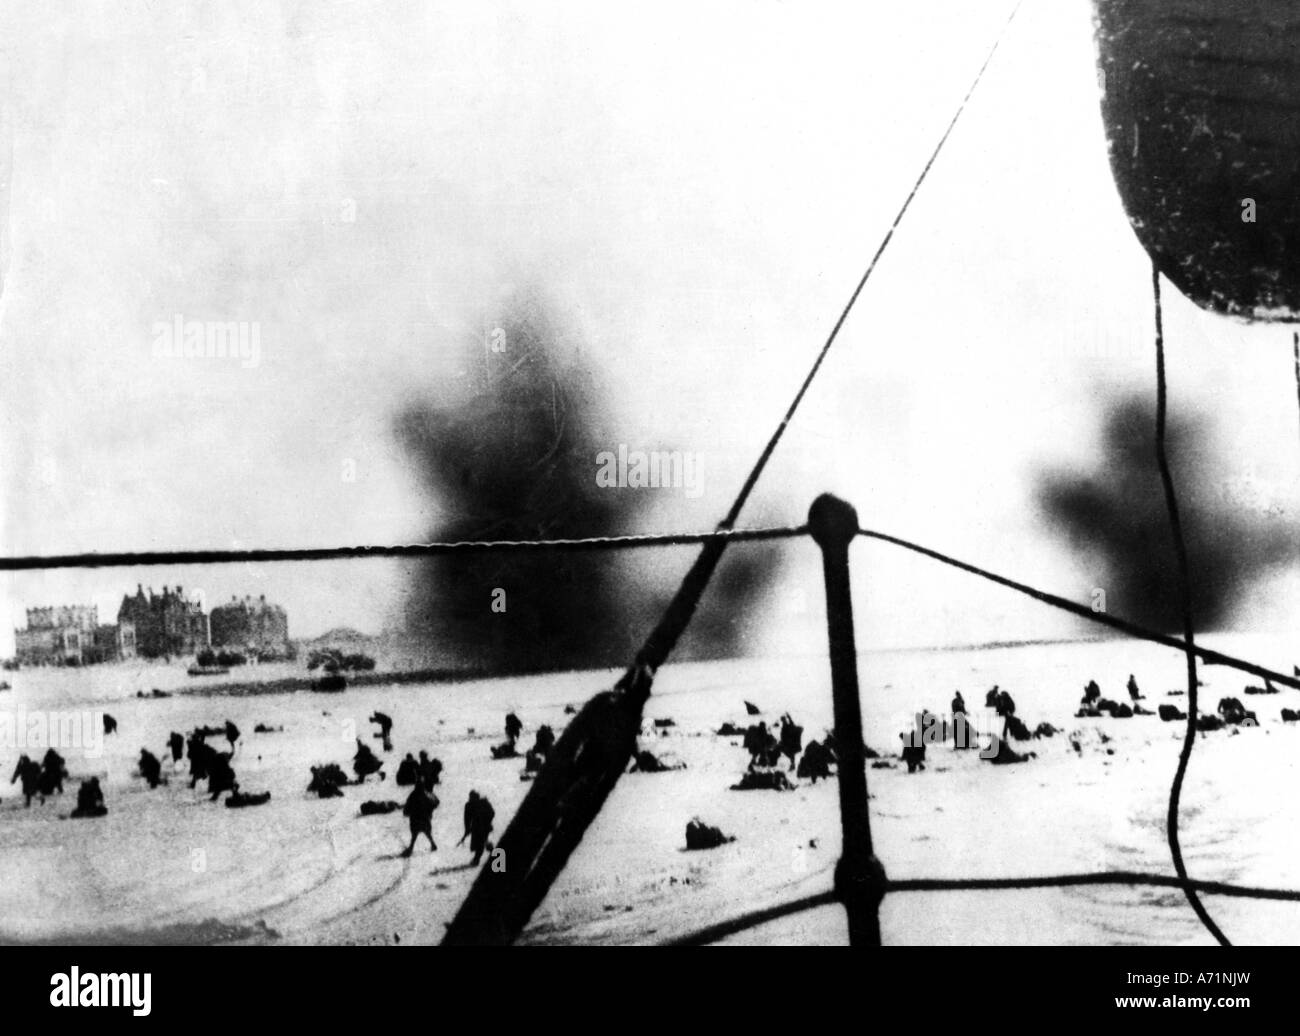 events, Second World War / WWII, France, Dunkirk, evacuation of Allied troops 26.5.1940 - 4.6.1940, British soldiers on beach under bombardment, Stock Photo